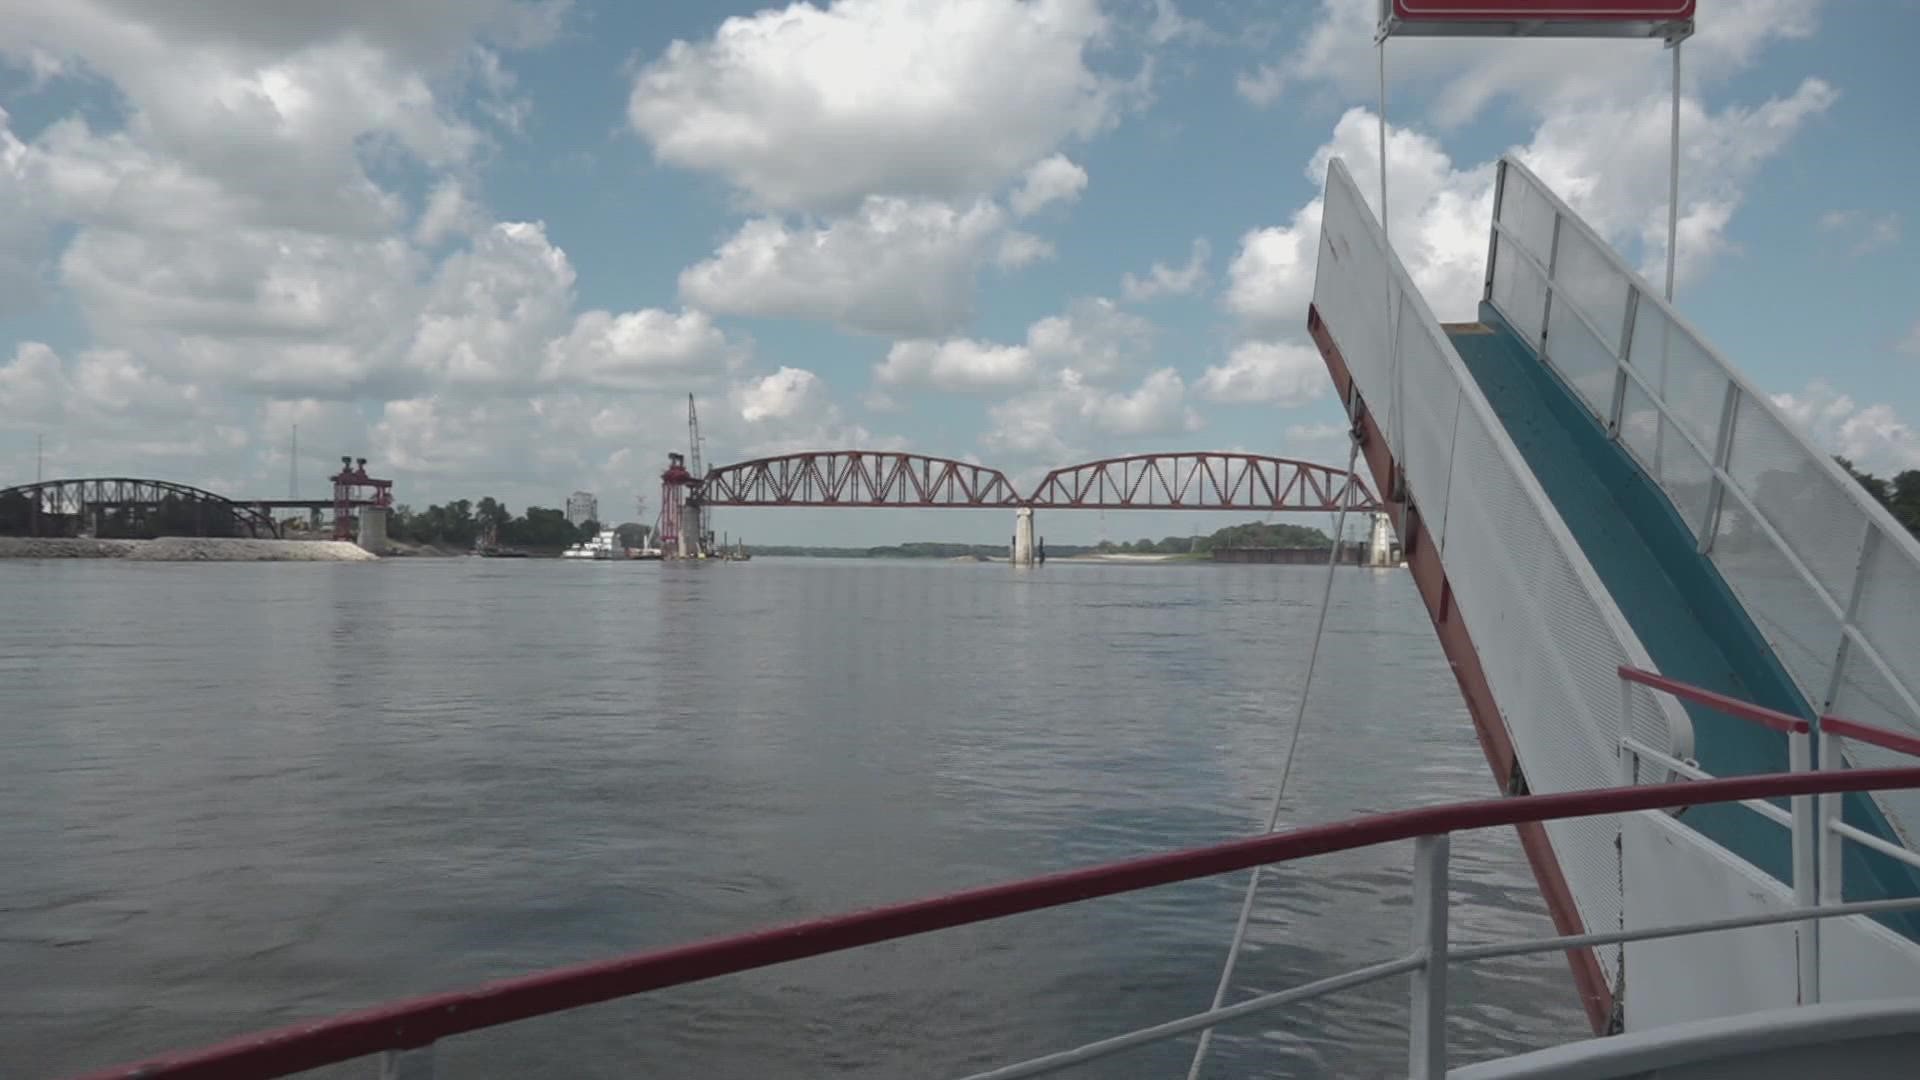 On Thursday, crews worked to lift the final truss of the Merchants Bridge into place over the Mississippi River. The project is expected to be completed this fall.